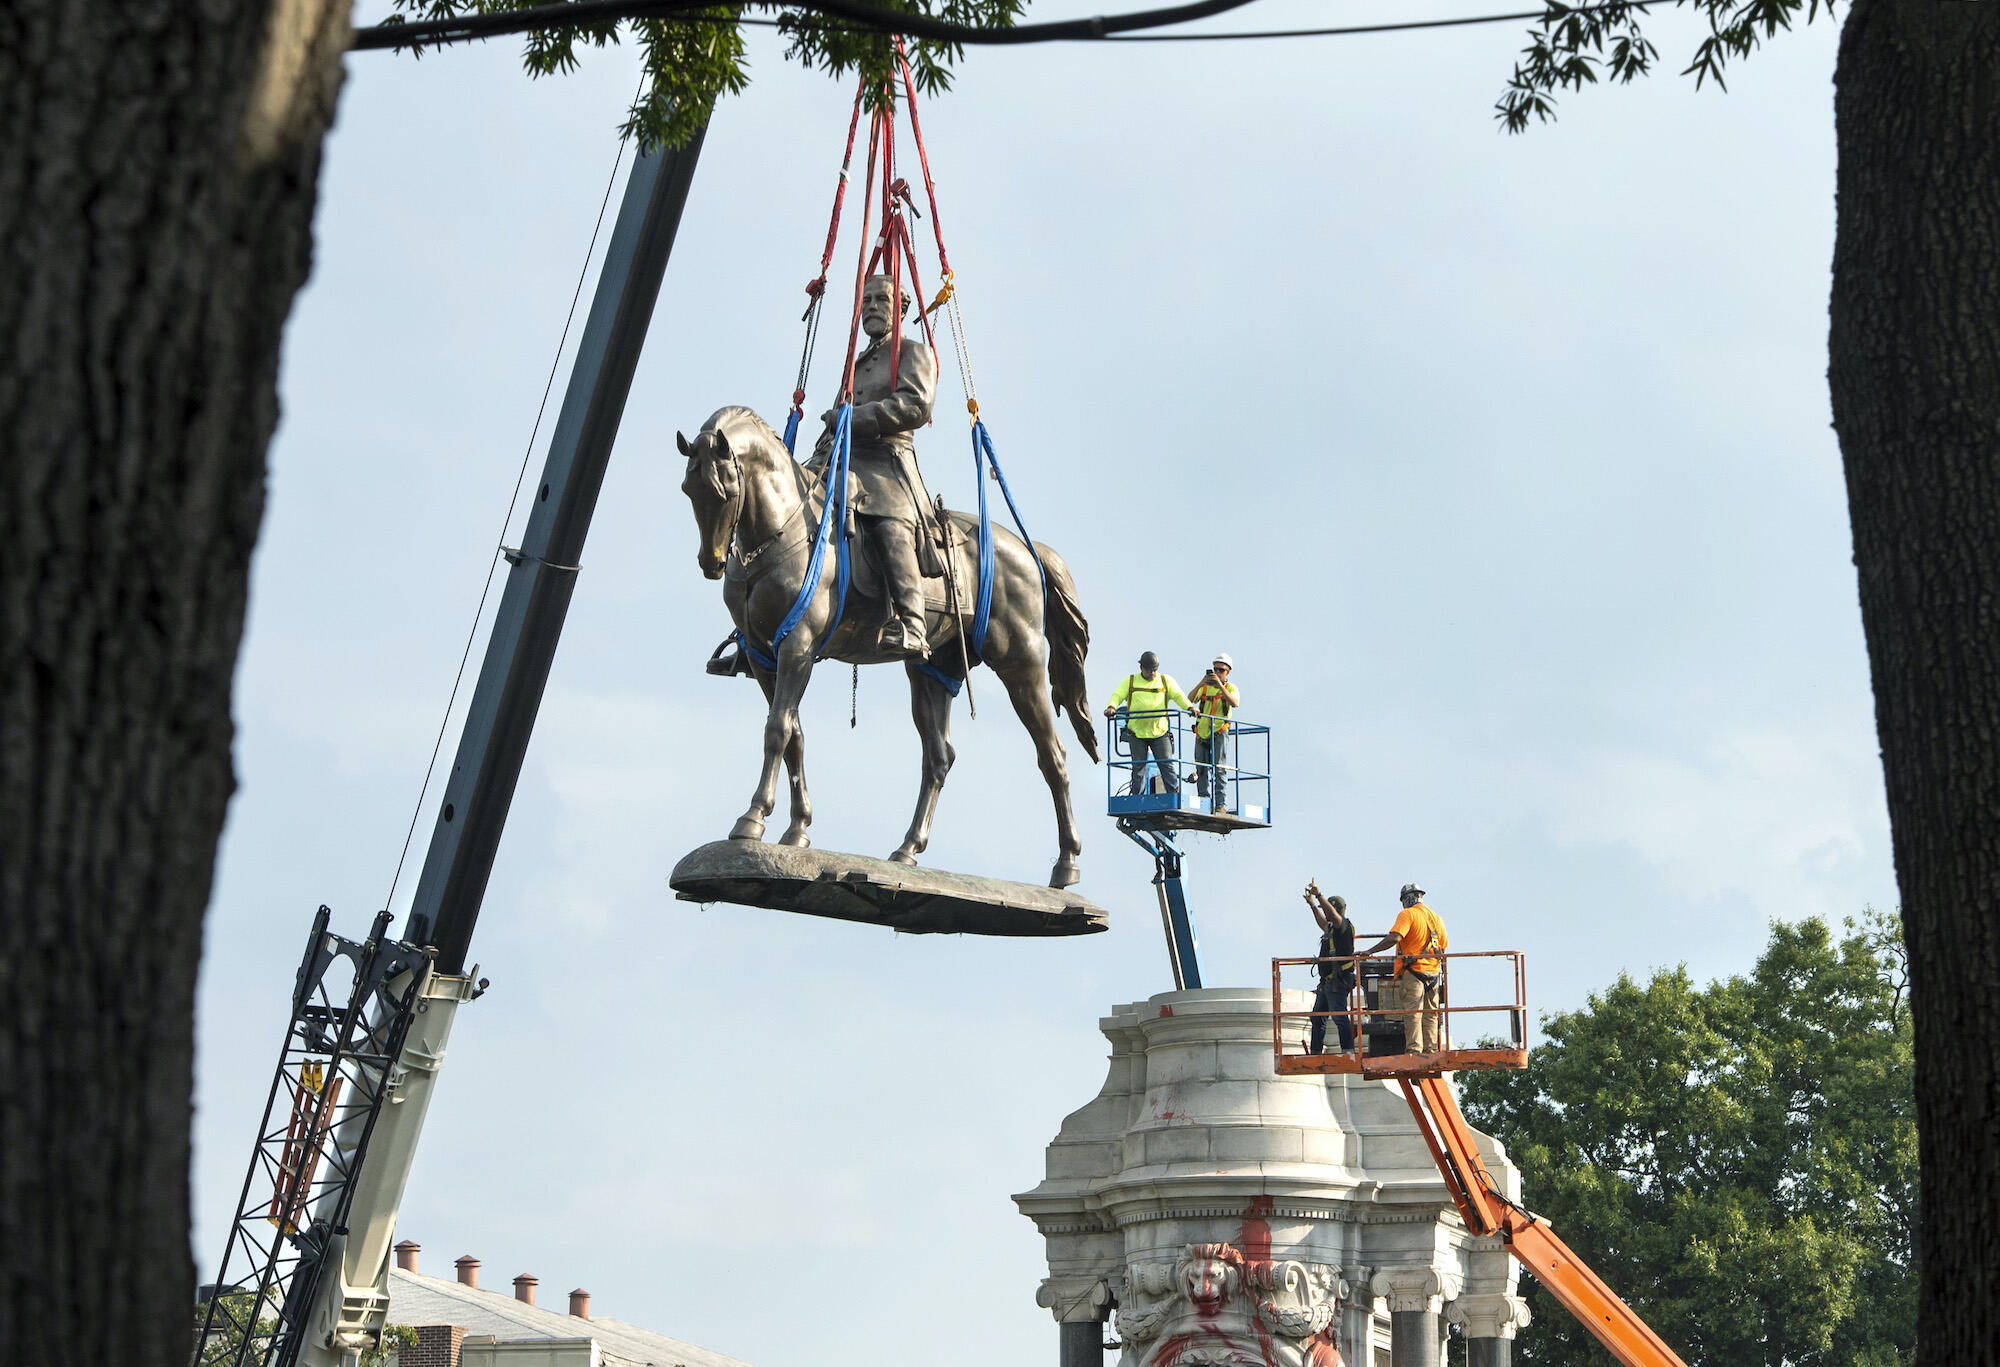 The Robert E. Lee statue is removed from its plinth